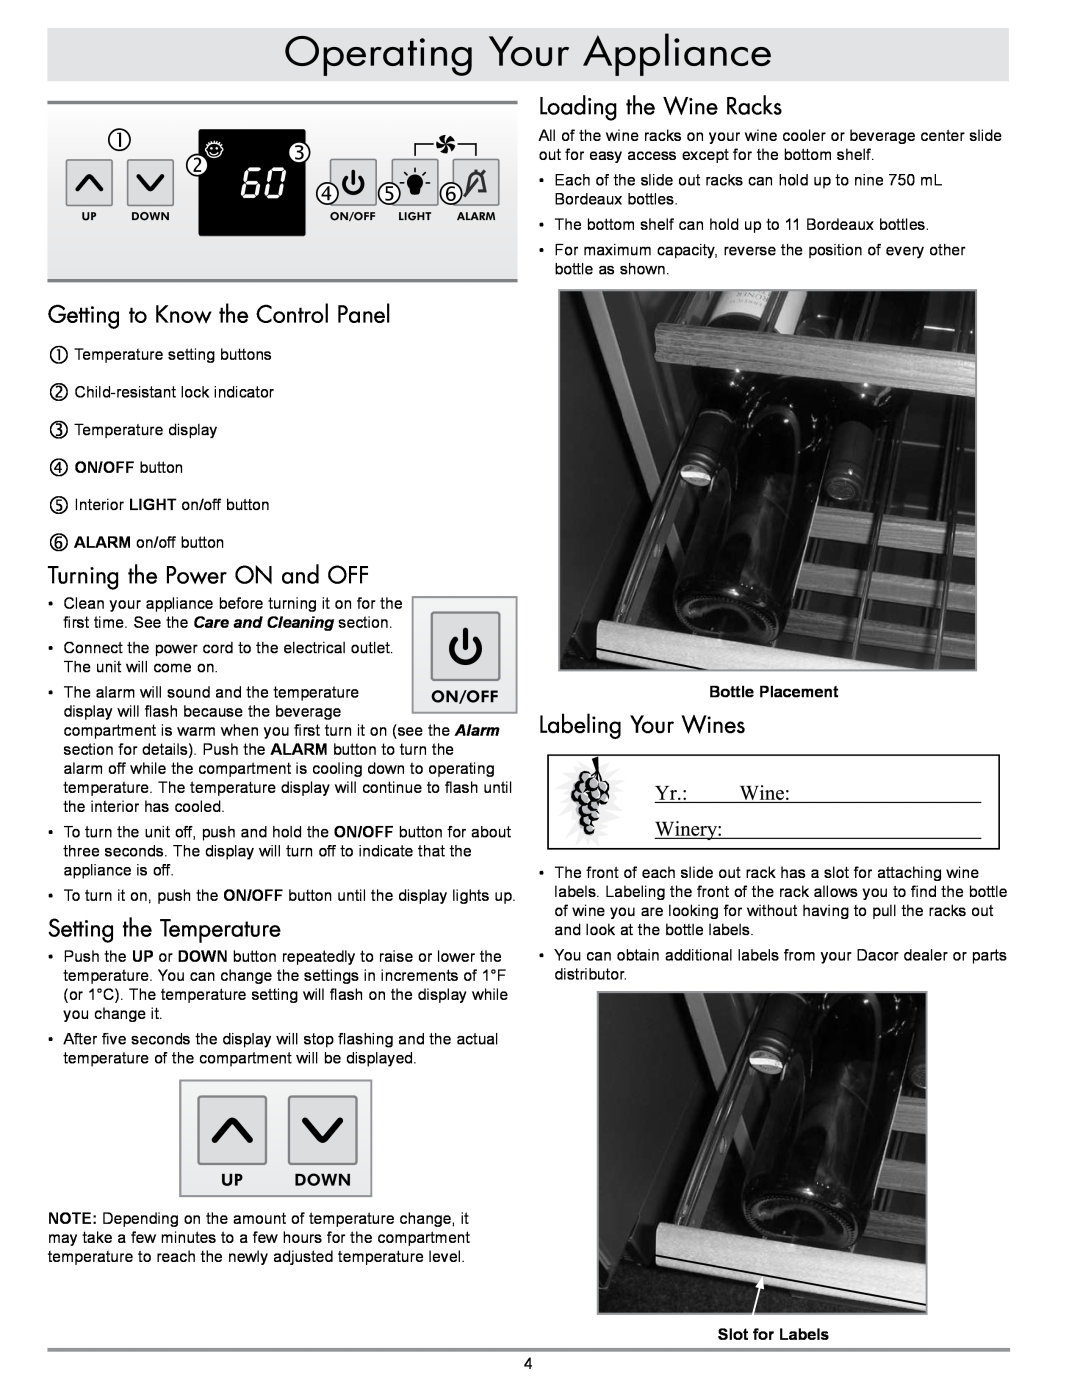 Dacor EF24LBCSS Operating Your Appliance, Loading the Wine Racks, Getting to Know the Control Panel, Labeling Your Wines 